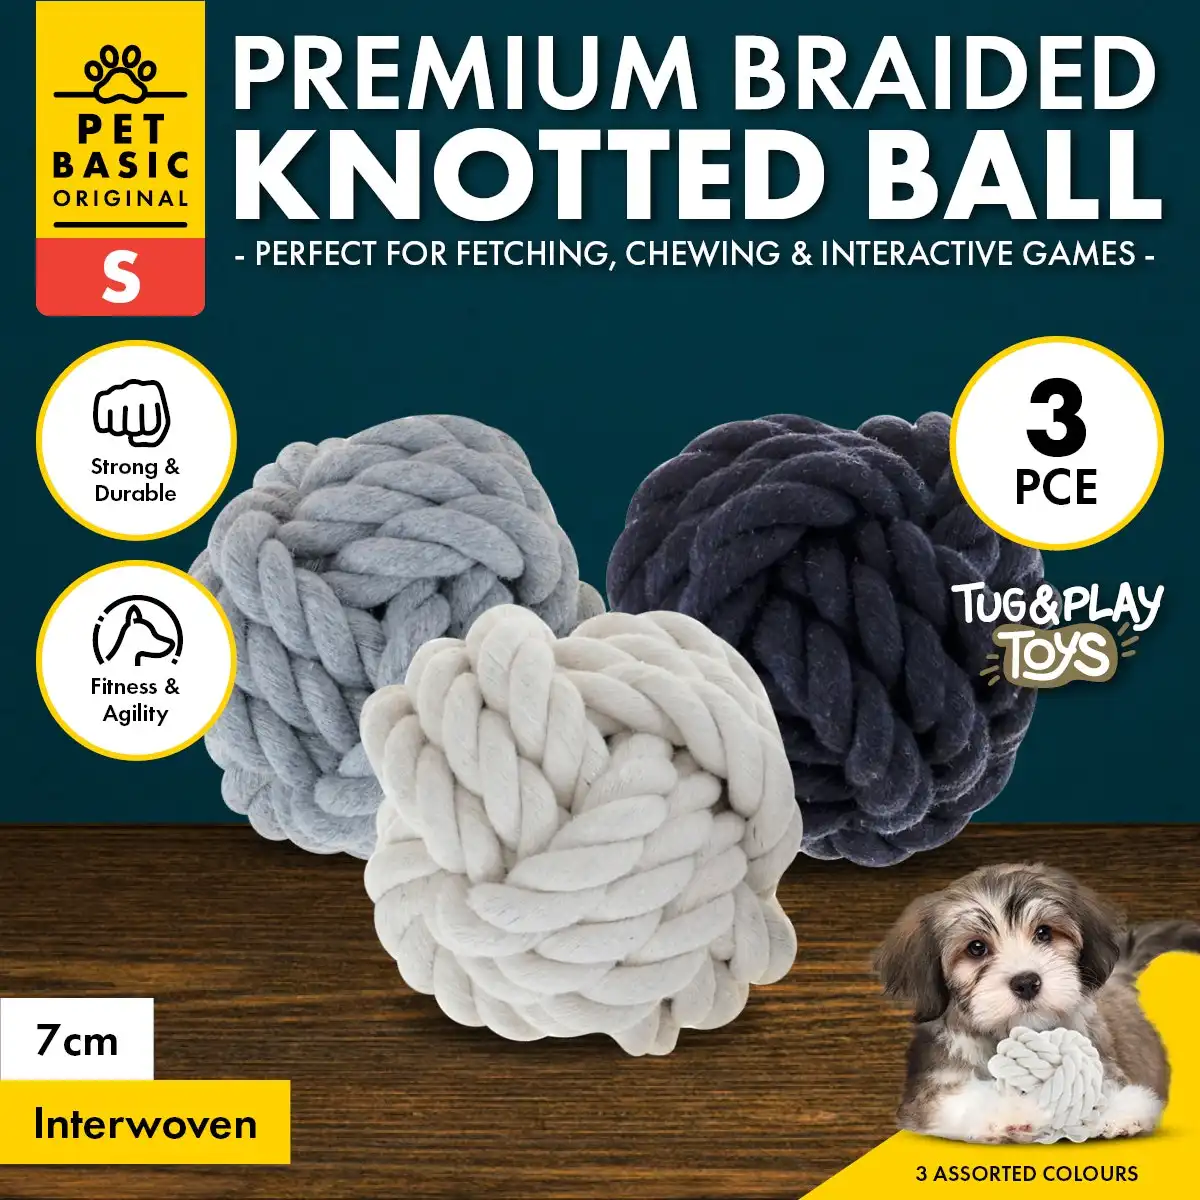 Pet Basic® 3PCE Premium Braided Knotted Ball Size Small Natural Fibres 7cm